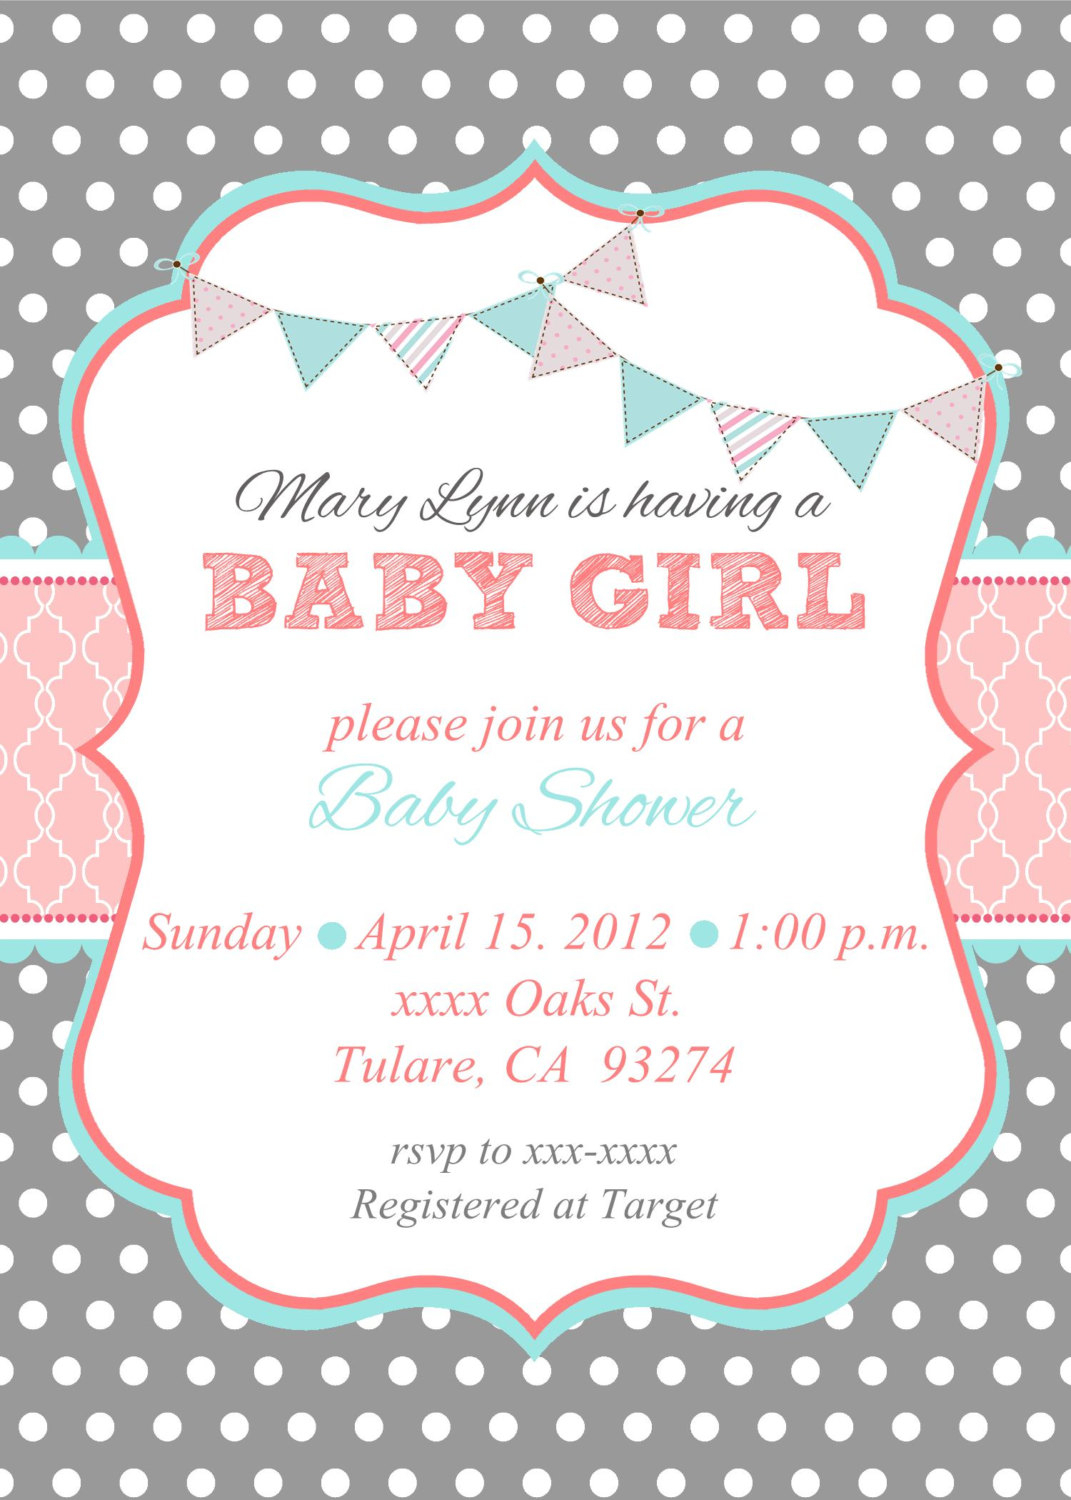 10 Nice Baby Shower By Mail Ideas baby shower baby shower invites etsy once upon a time baby shower 2024